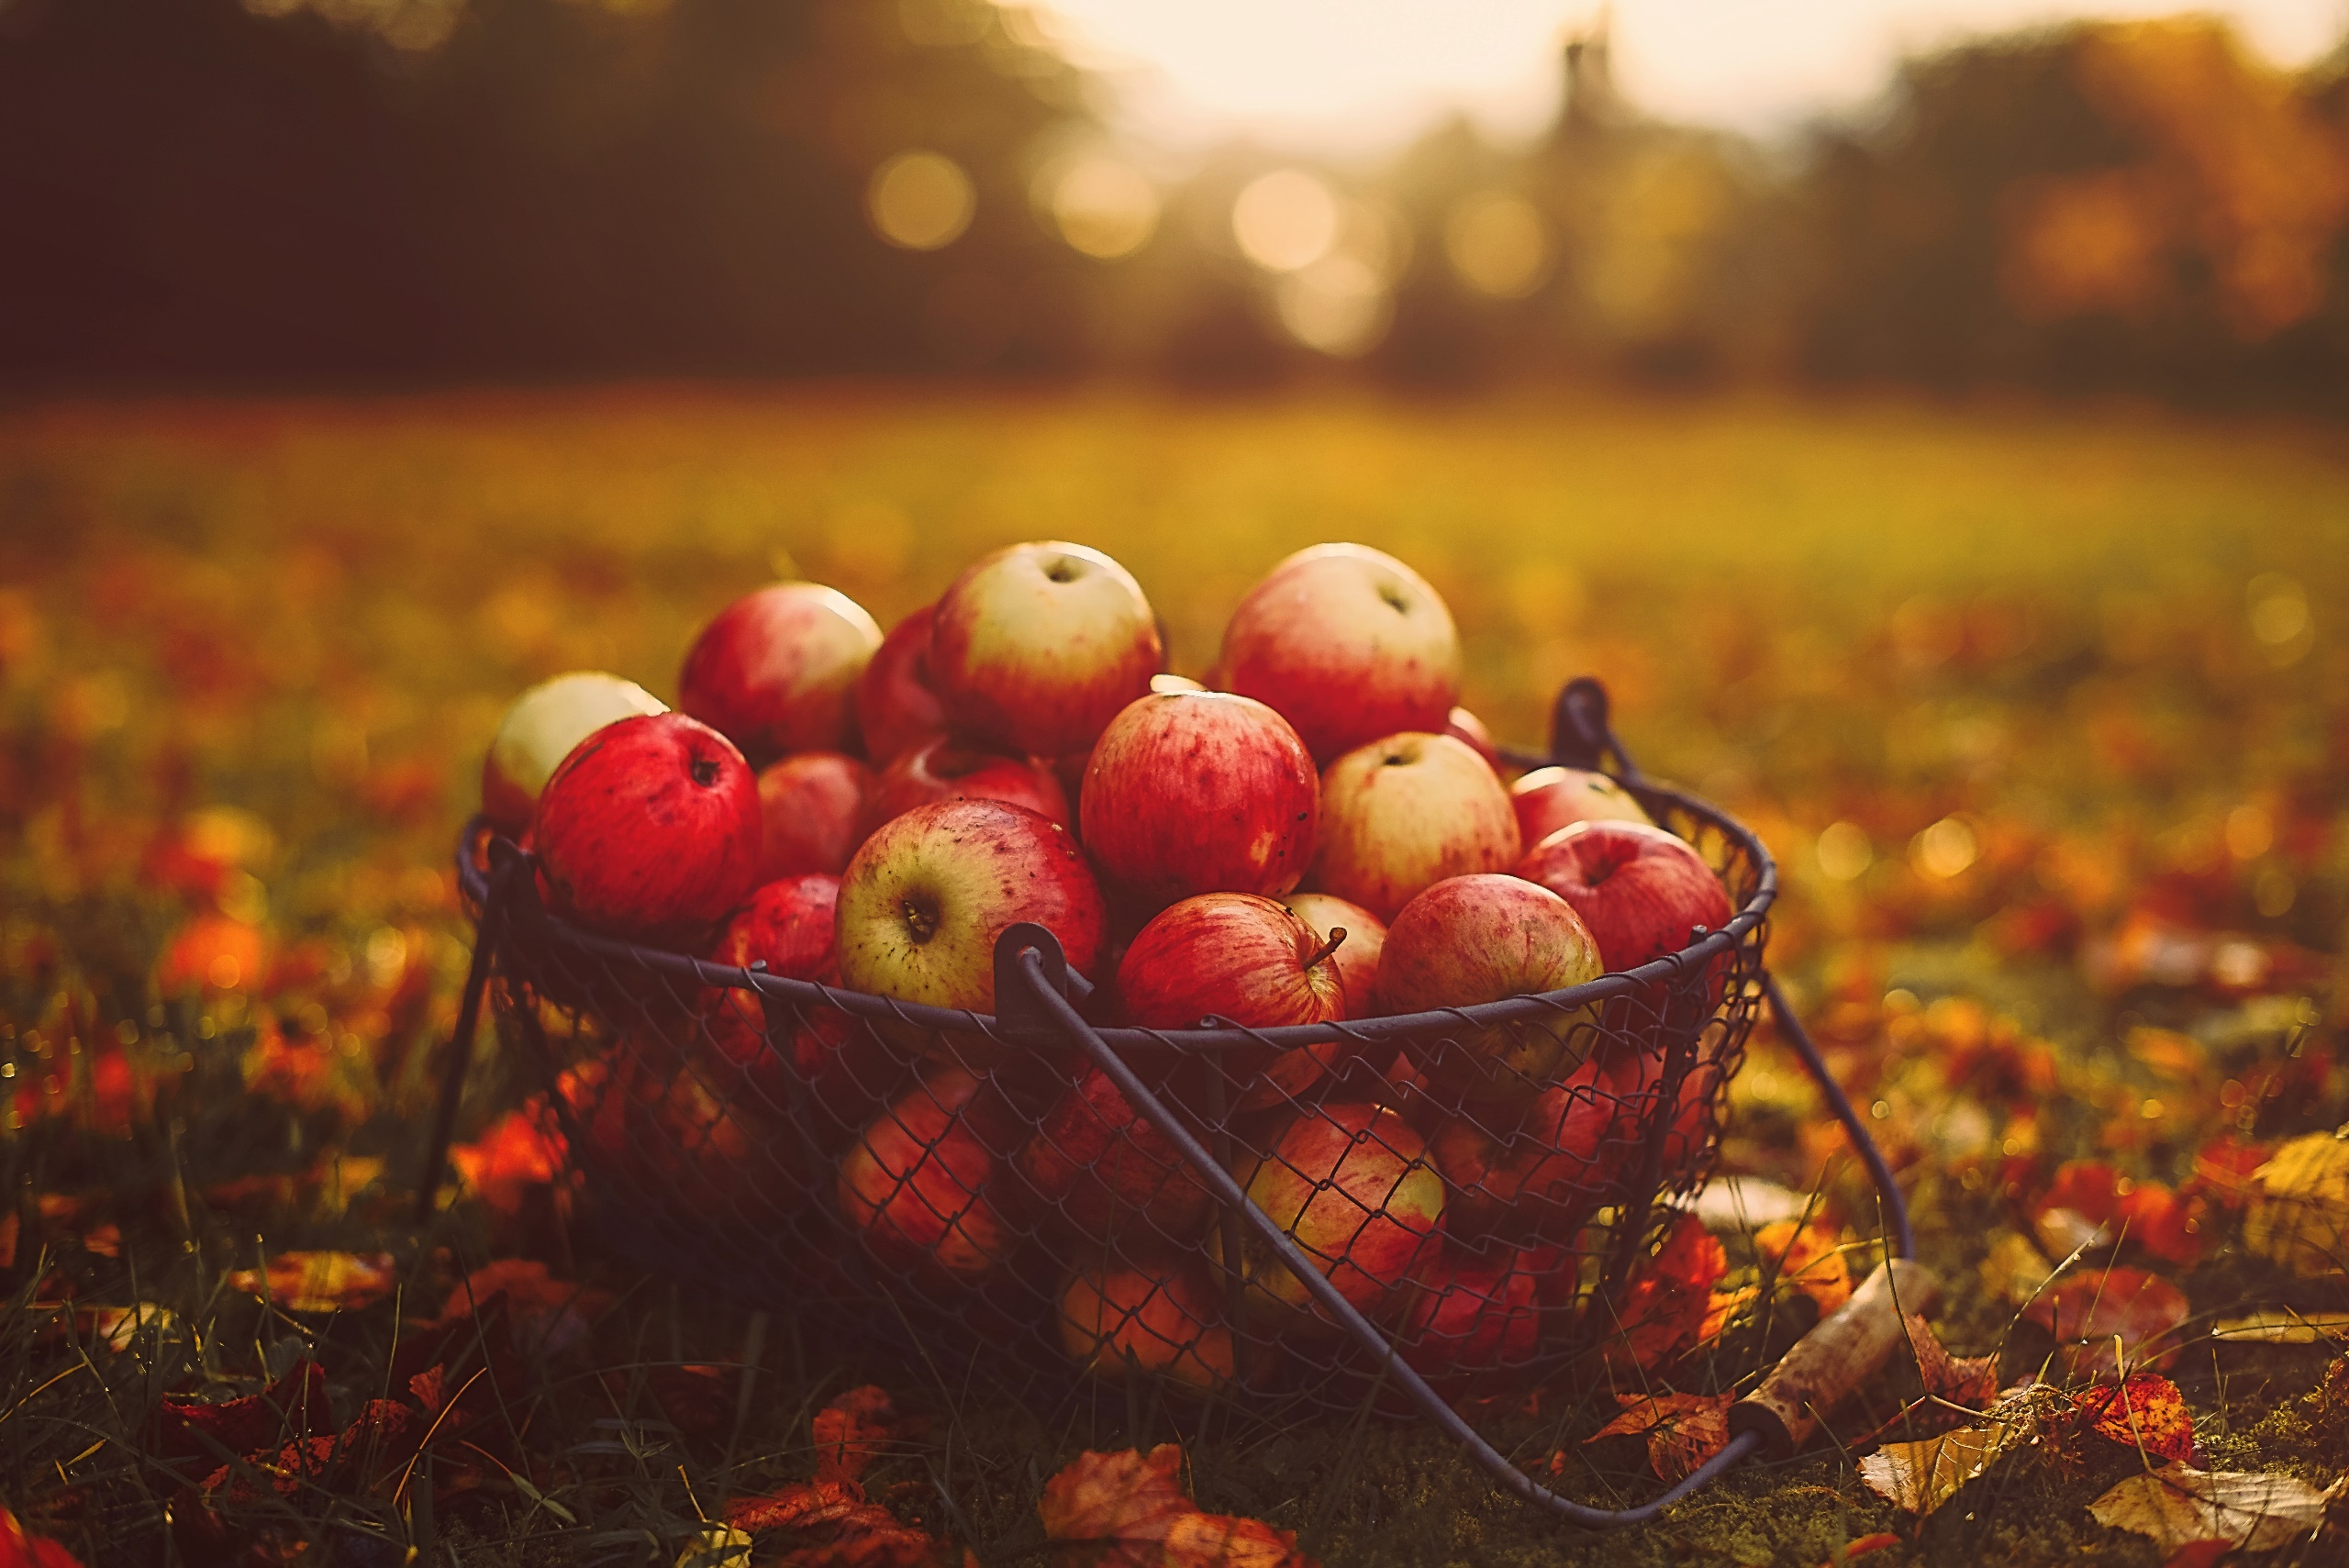 General 2560x1709 outdoors food fruit leaves apples baskets fall